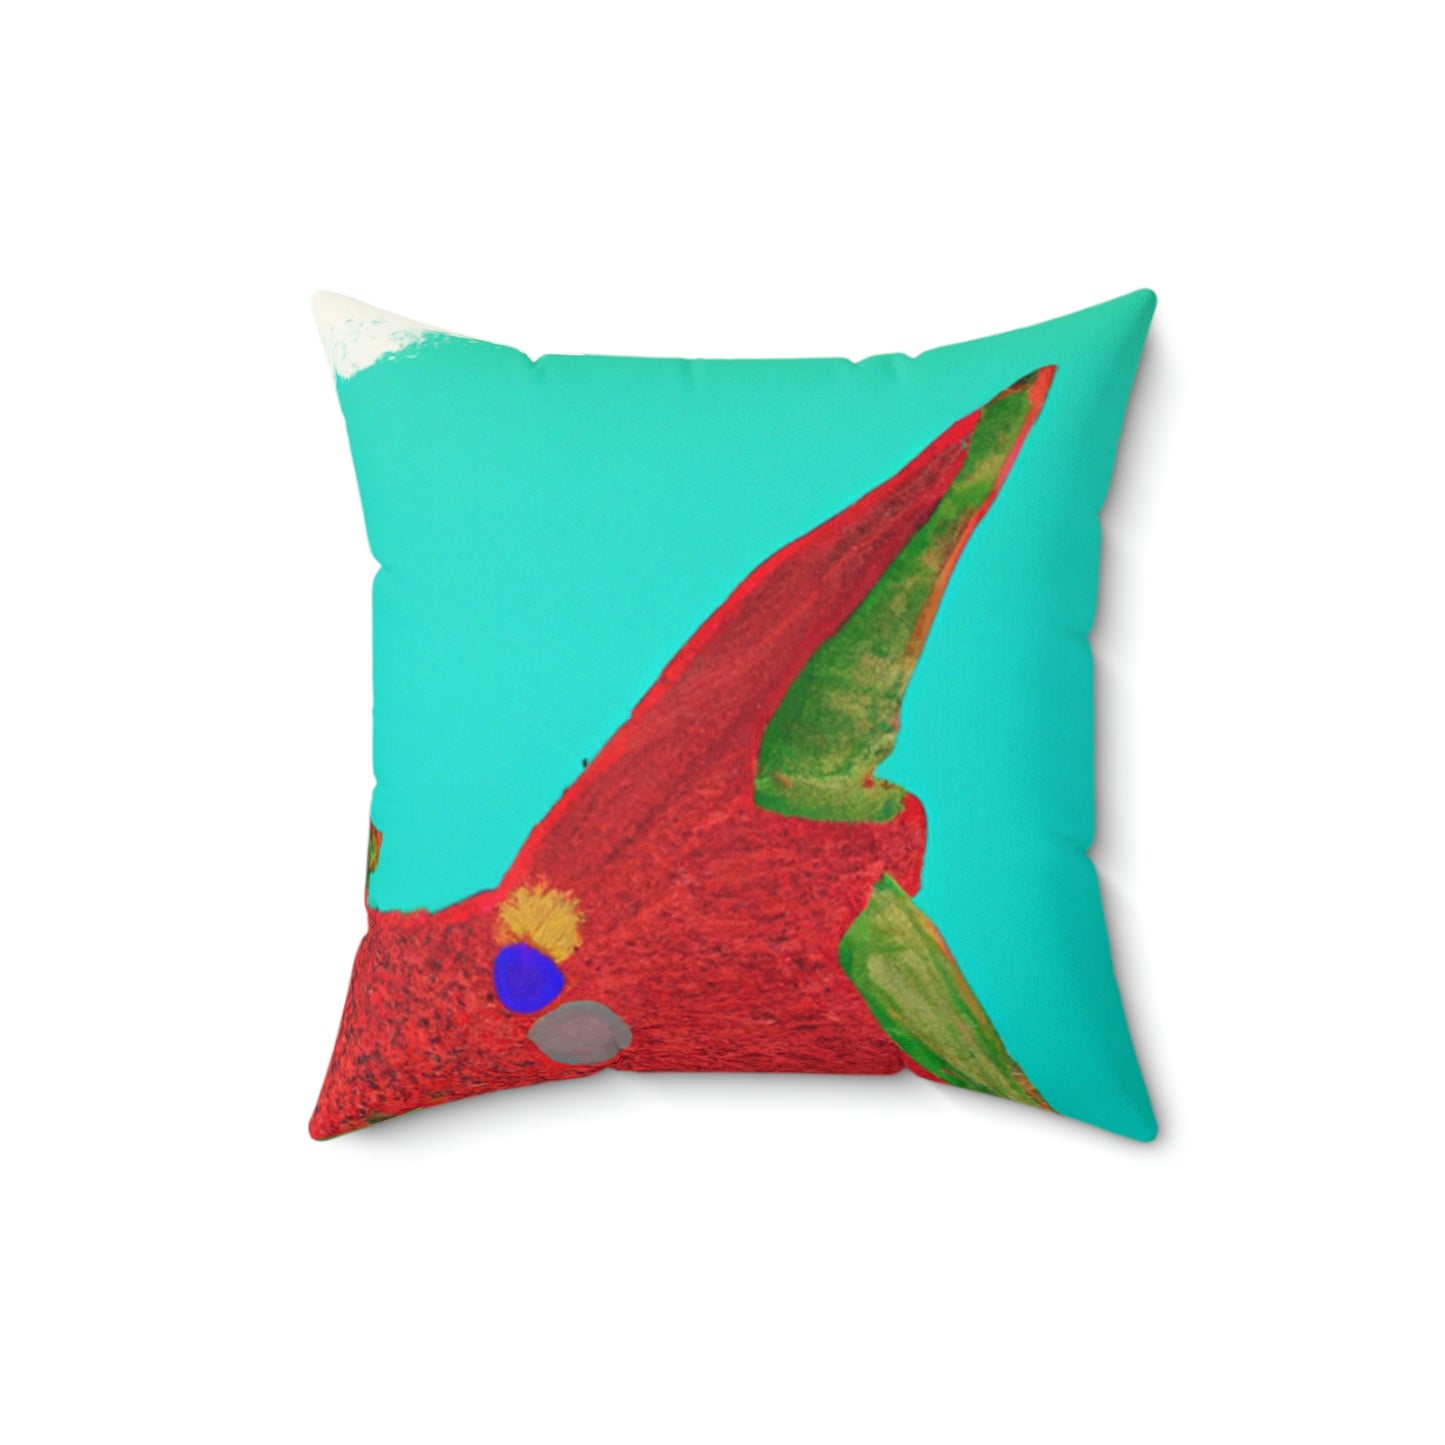 The Mysterious Flying Fish and Its Enigmatic Secret - The Alien Square Pillow